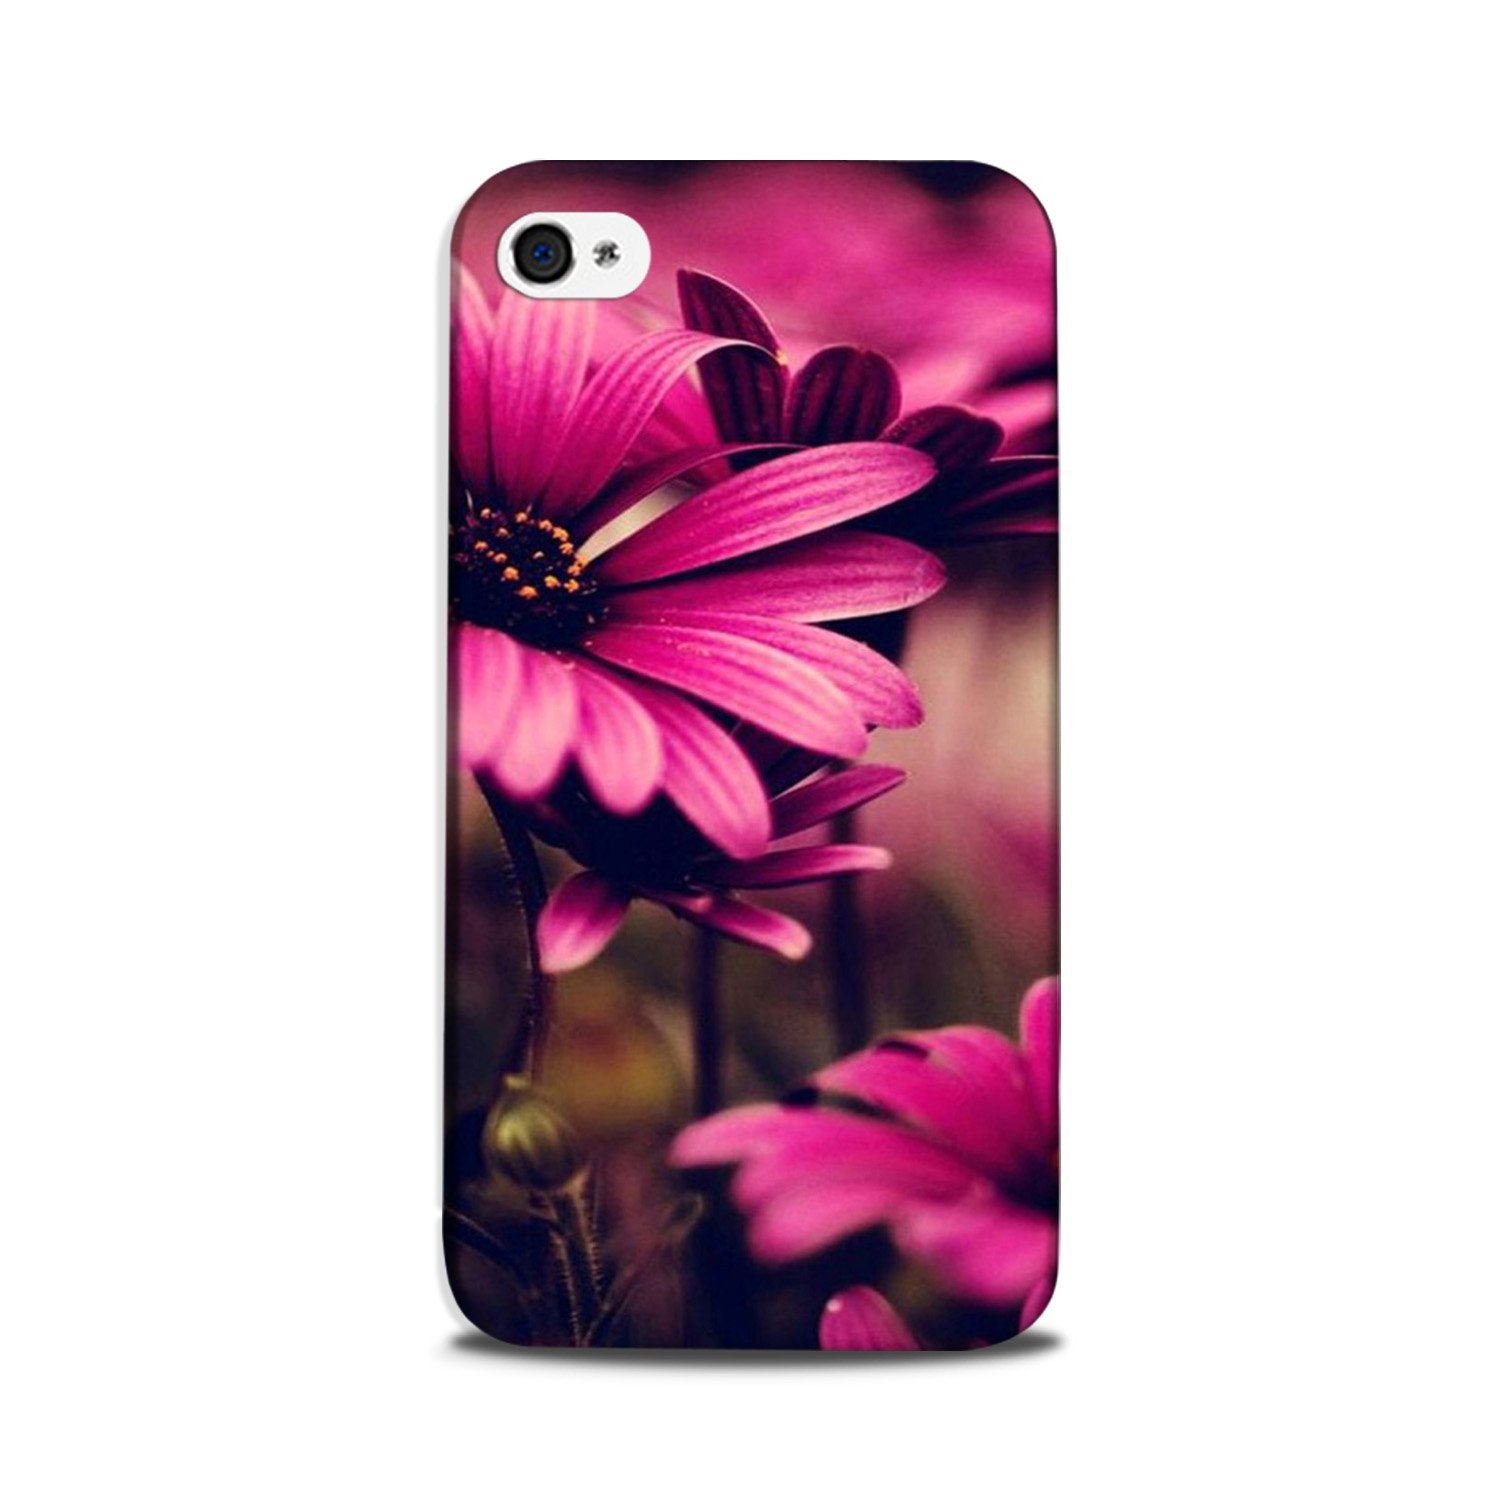 Purple Daisy Case for iPhone 5/ 5s